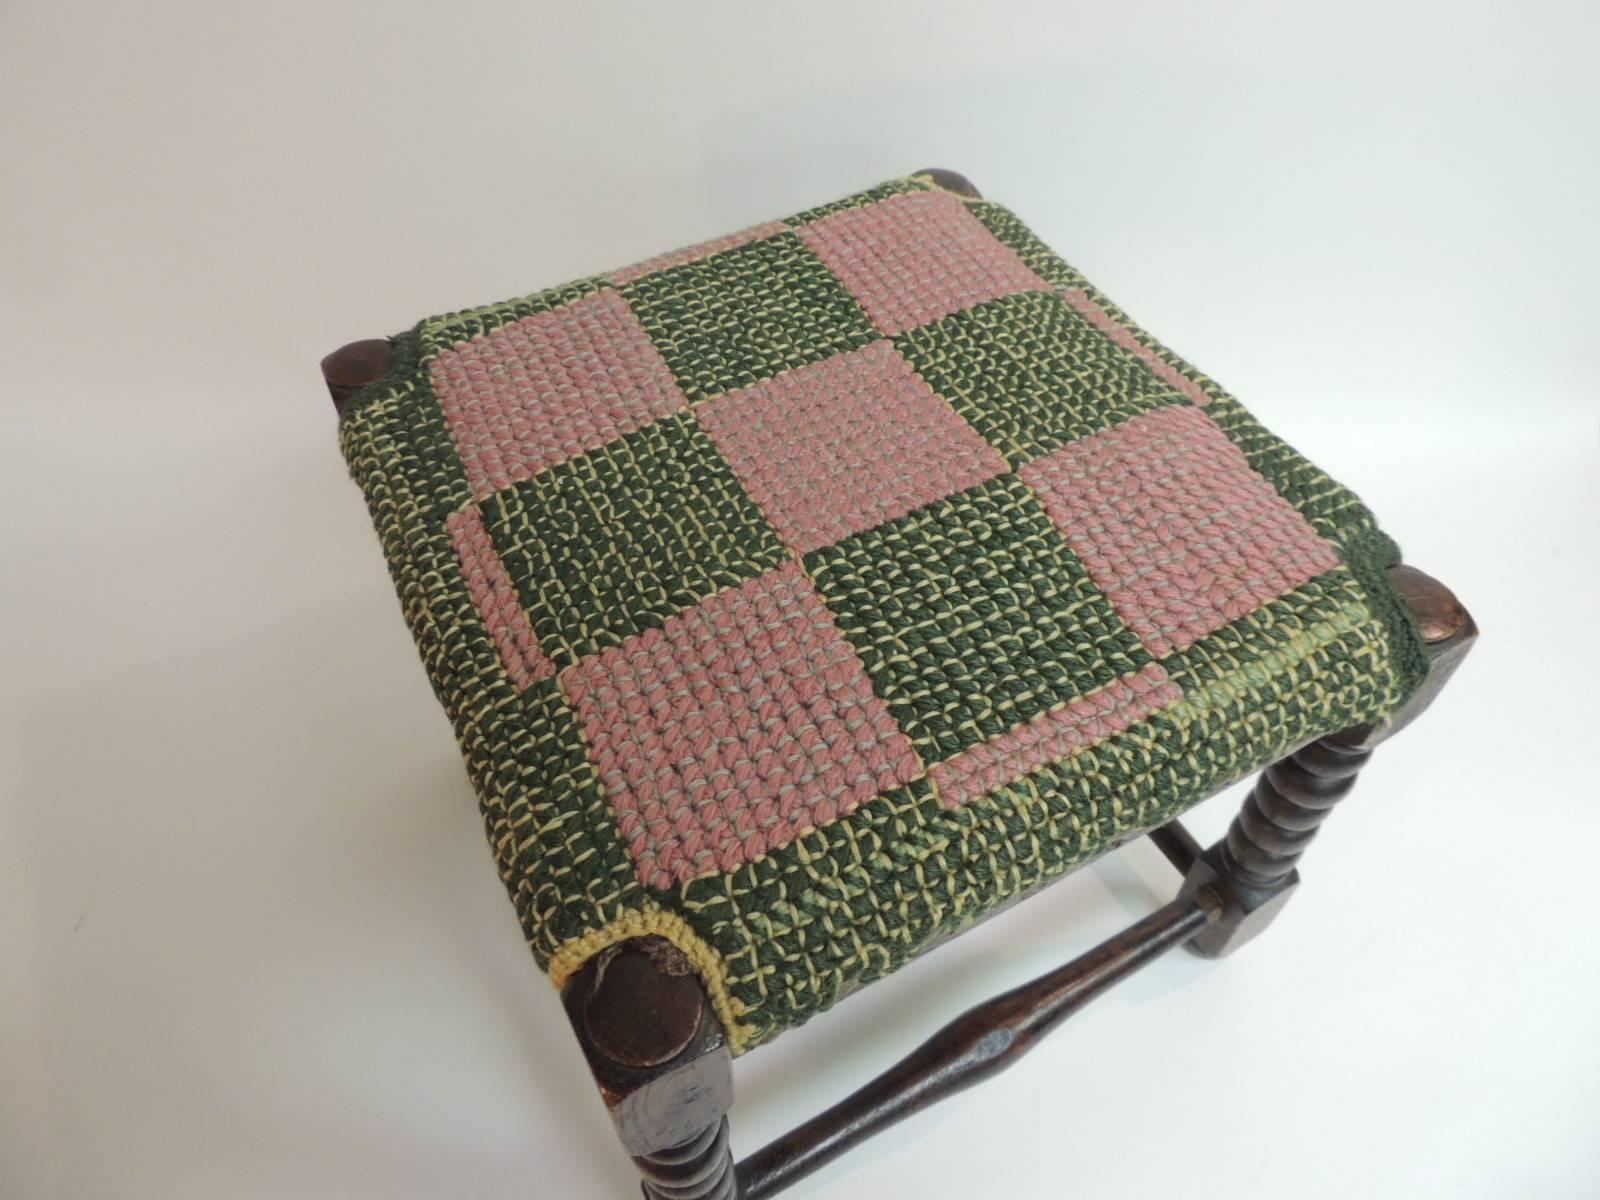 Antique Square William and Mary Style Turned Wood Legs Stool
Antique Square William and Mary Style Turned Wood Legs Stool. Four legs small ottoman upholstered in a rag rug green and pink top.
Size: 13 x 13 x 12.5 H
